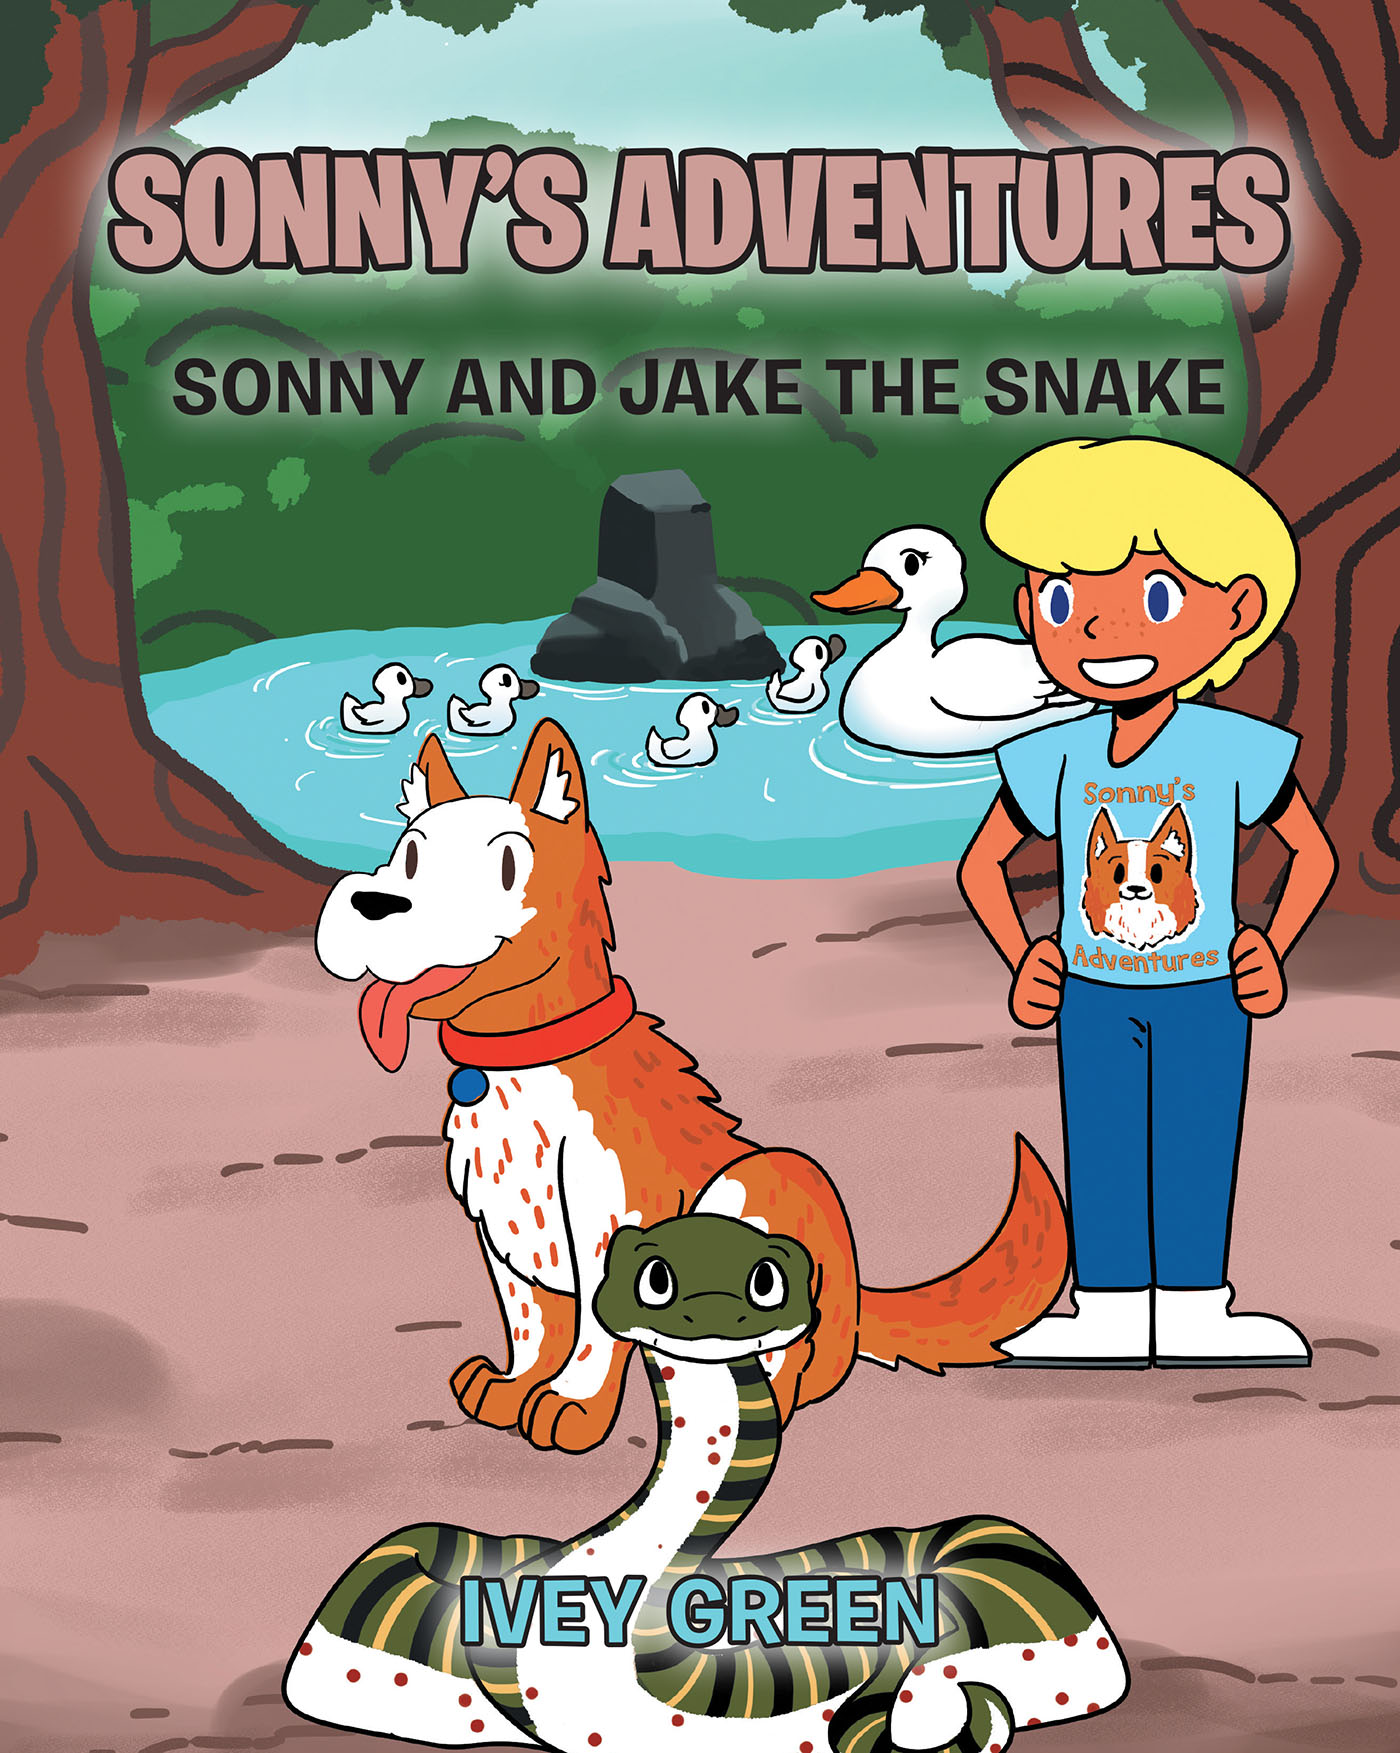 Author Ivey Green’s New Book, "Sonny’s Adventures: Sonny and Jake the Snake," is a Children’s Story About a Puppy Dog Named Sonny Who Lives in the South